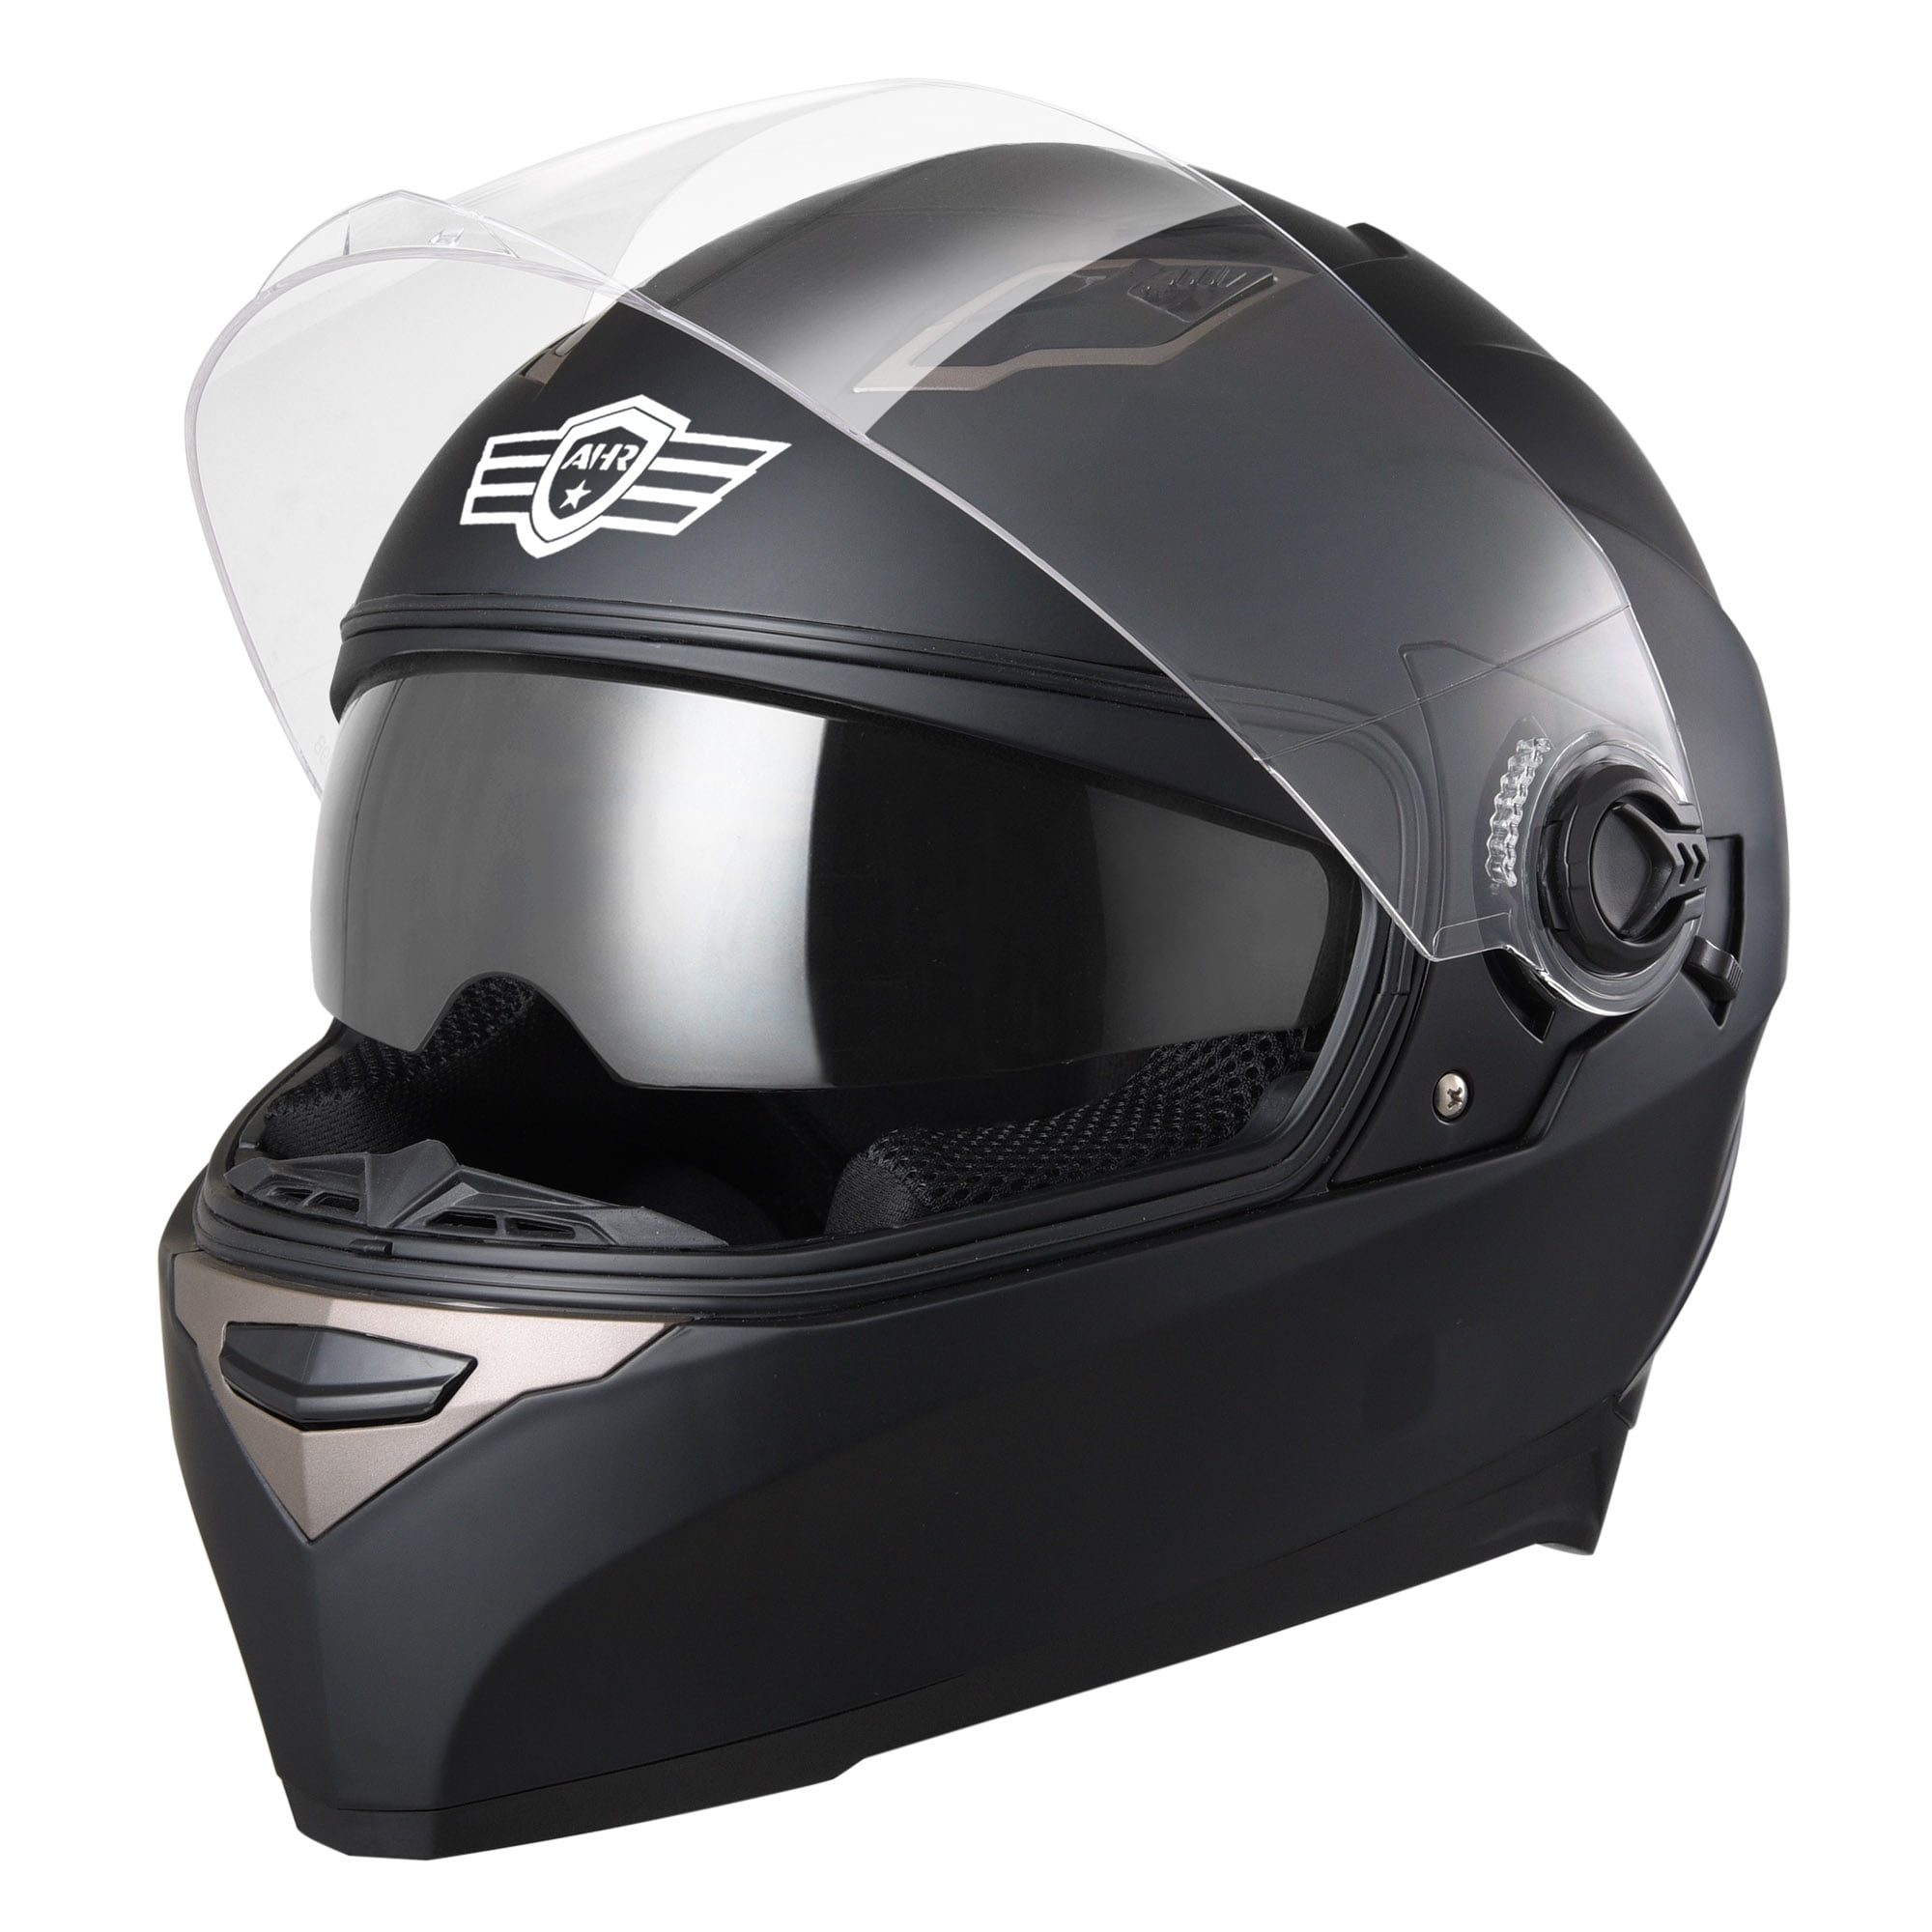 POLO HELMET WITH VIZER,FACE GUARD GRILL Exclusive Ridding Helmet Grill Helmet 